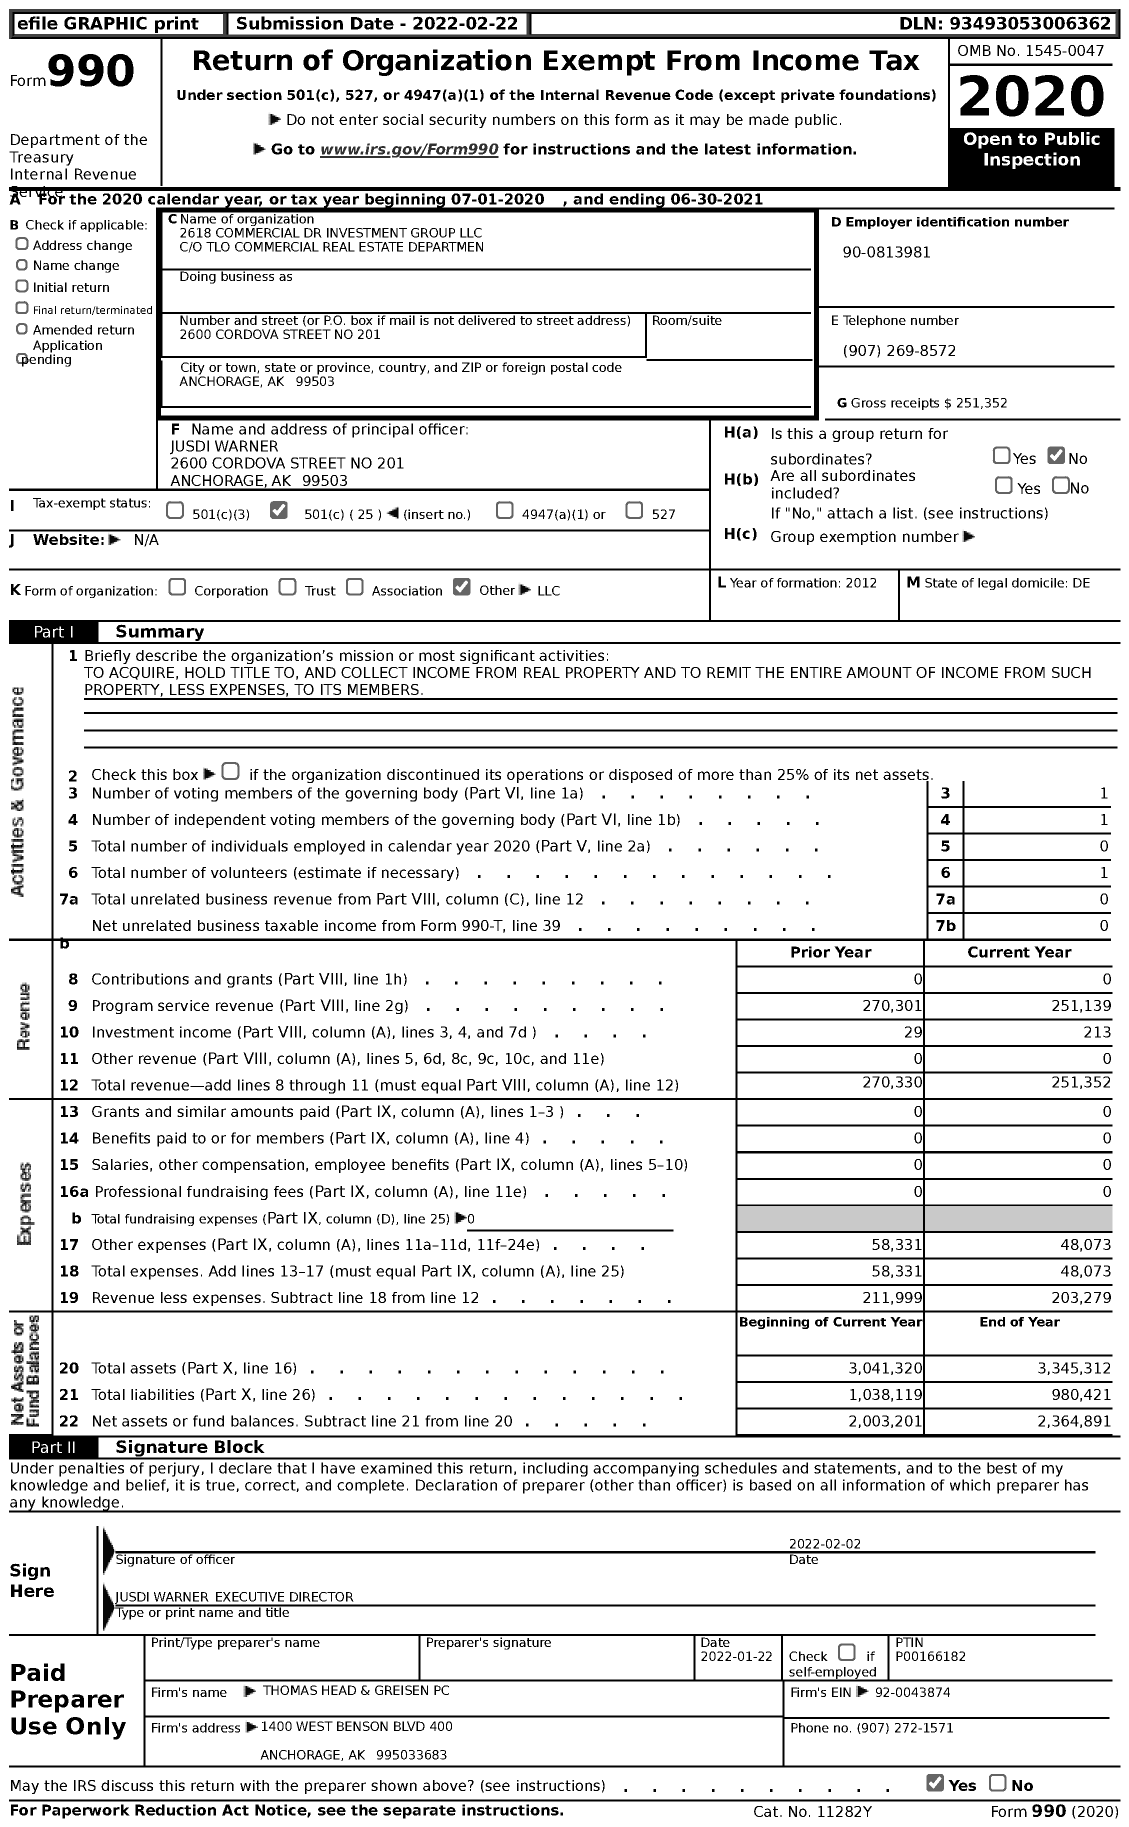 Image of first page of 2020 Form 990 for 2618 Commercial Dr Investment Group LLC